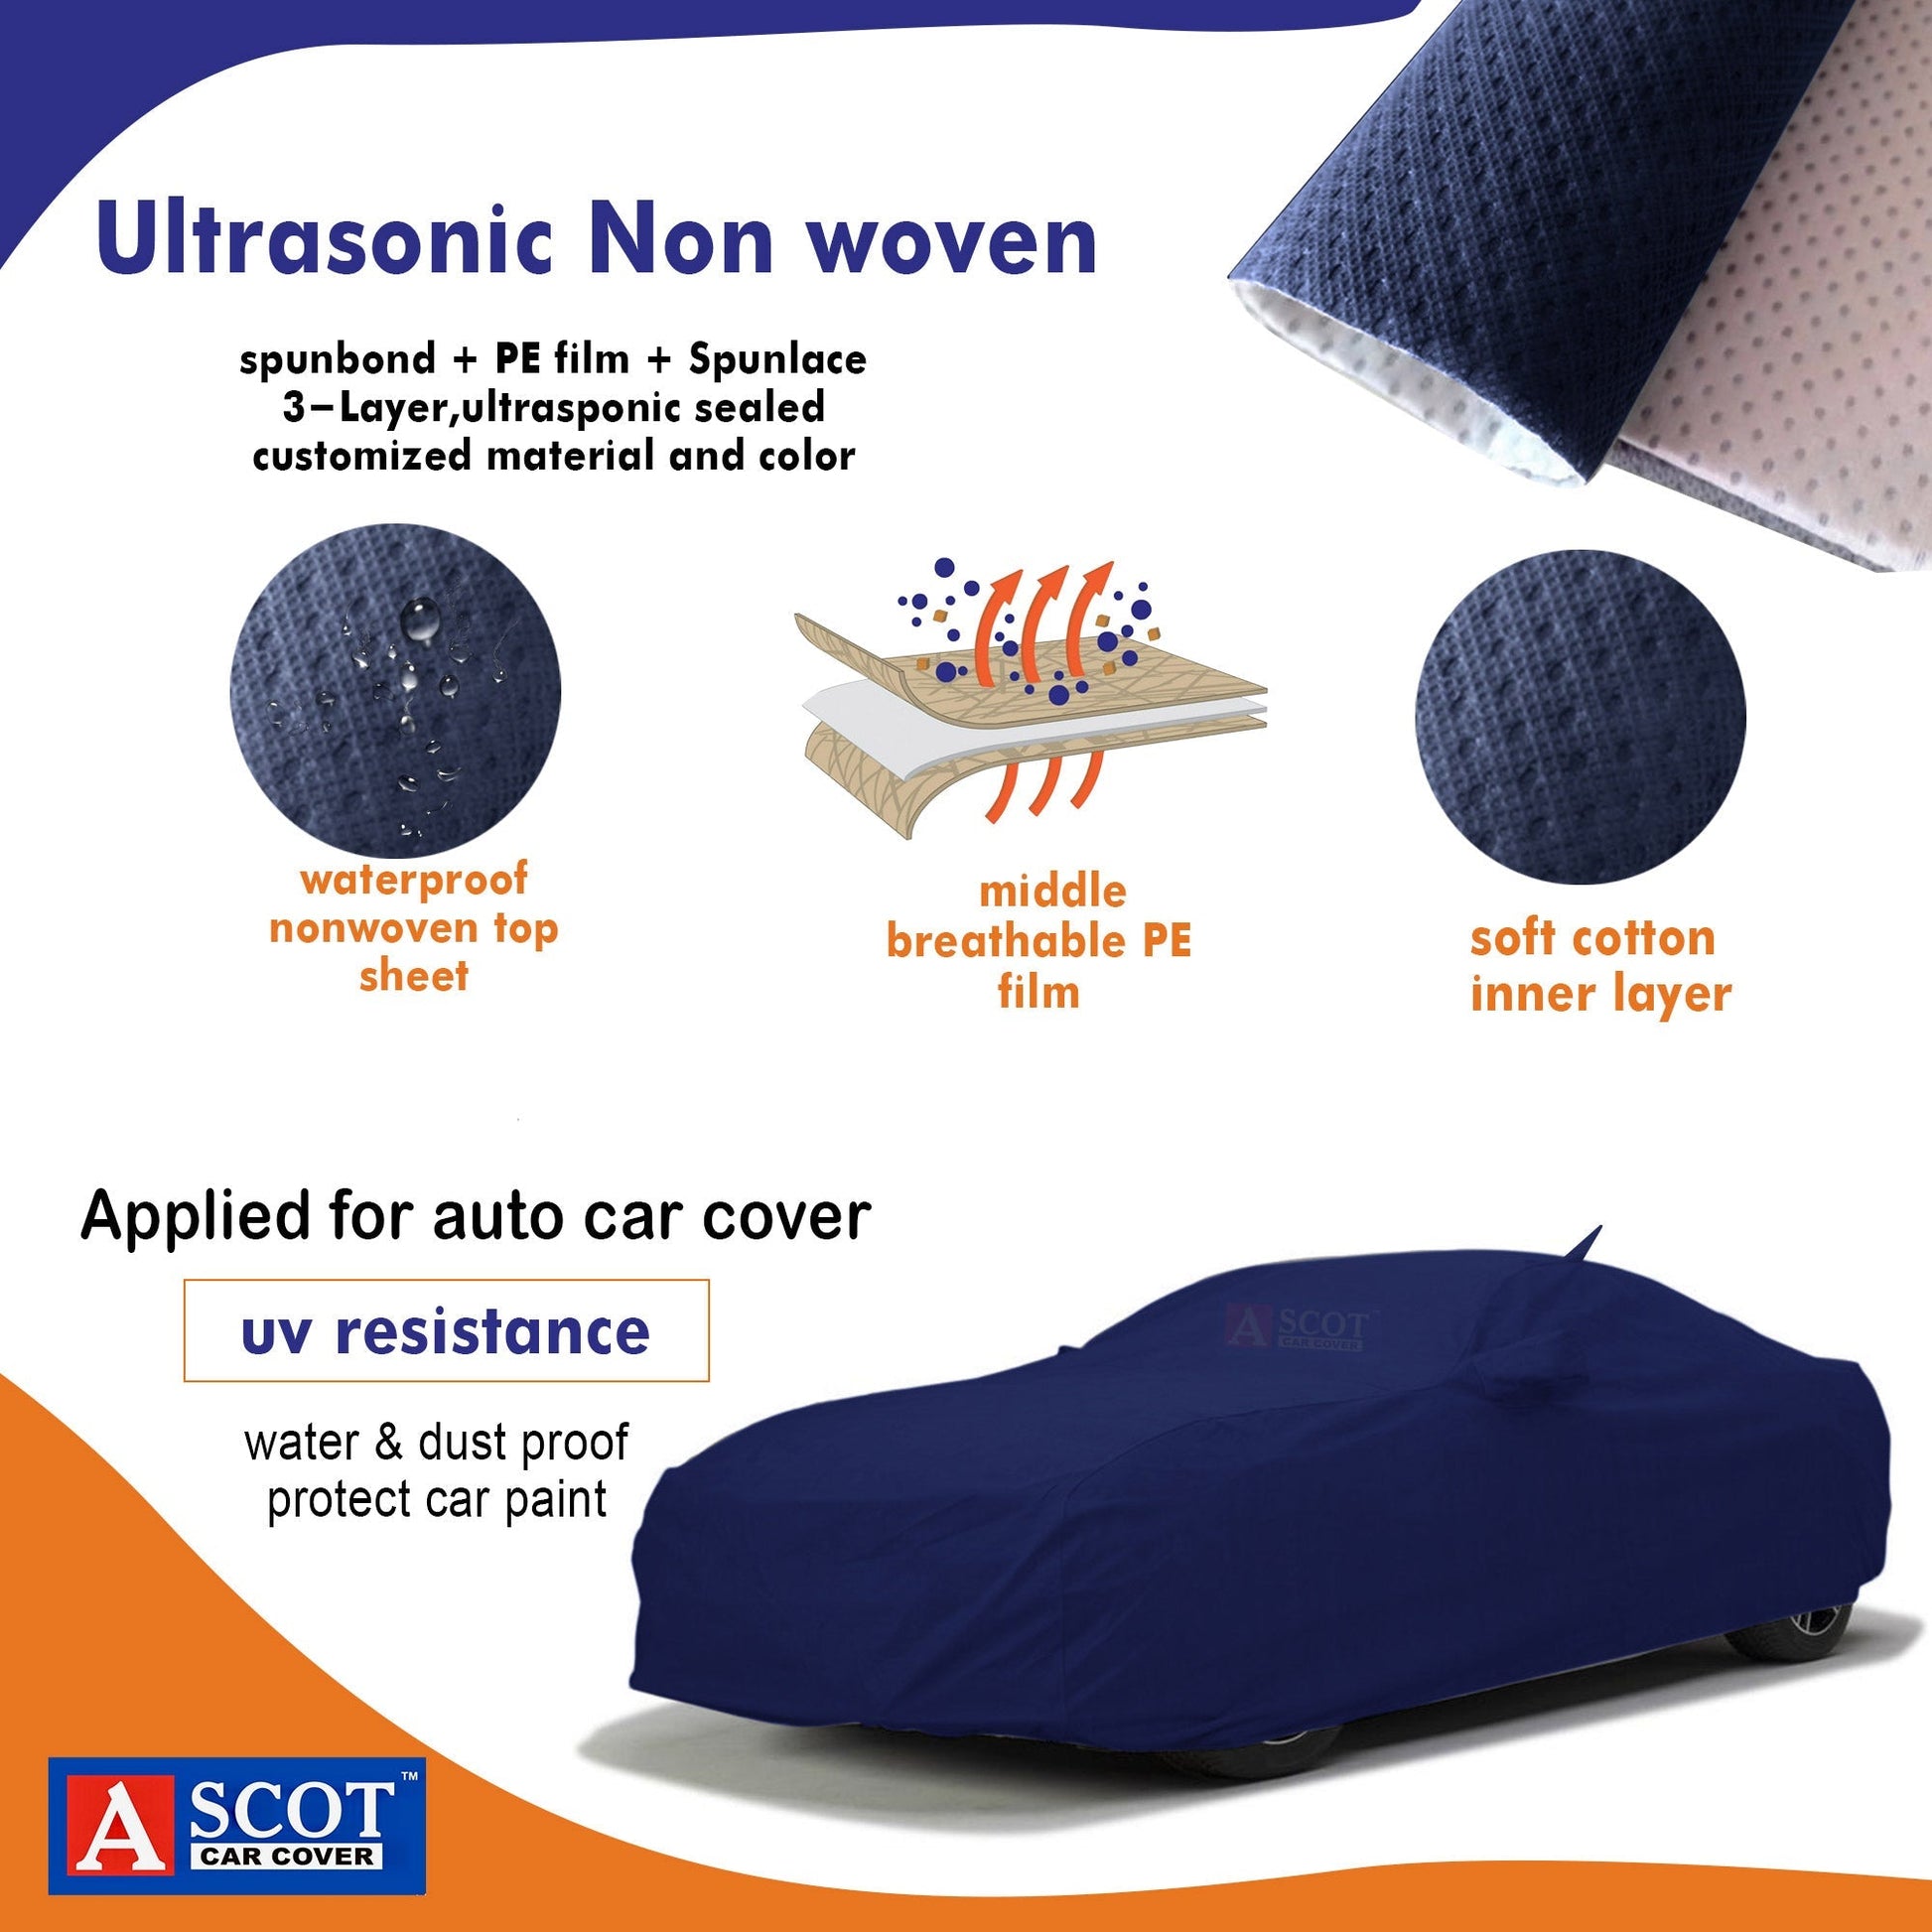 Ascot car body cover featuring ultrasonic non woven, spunbond, ultrasonic sealed customized material and color